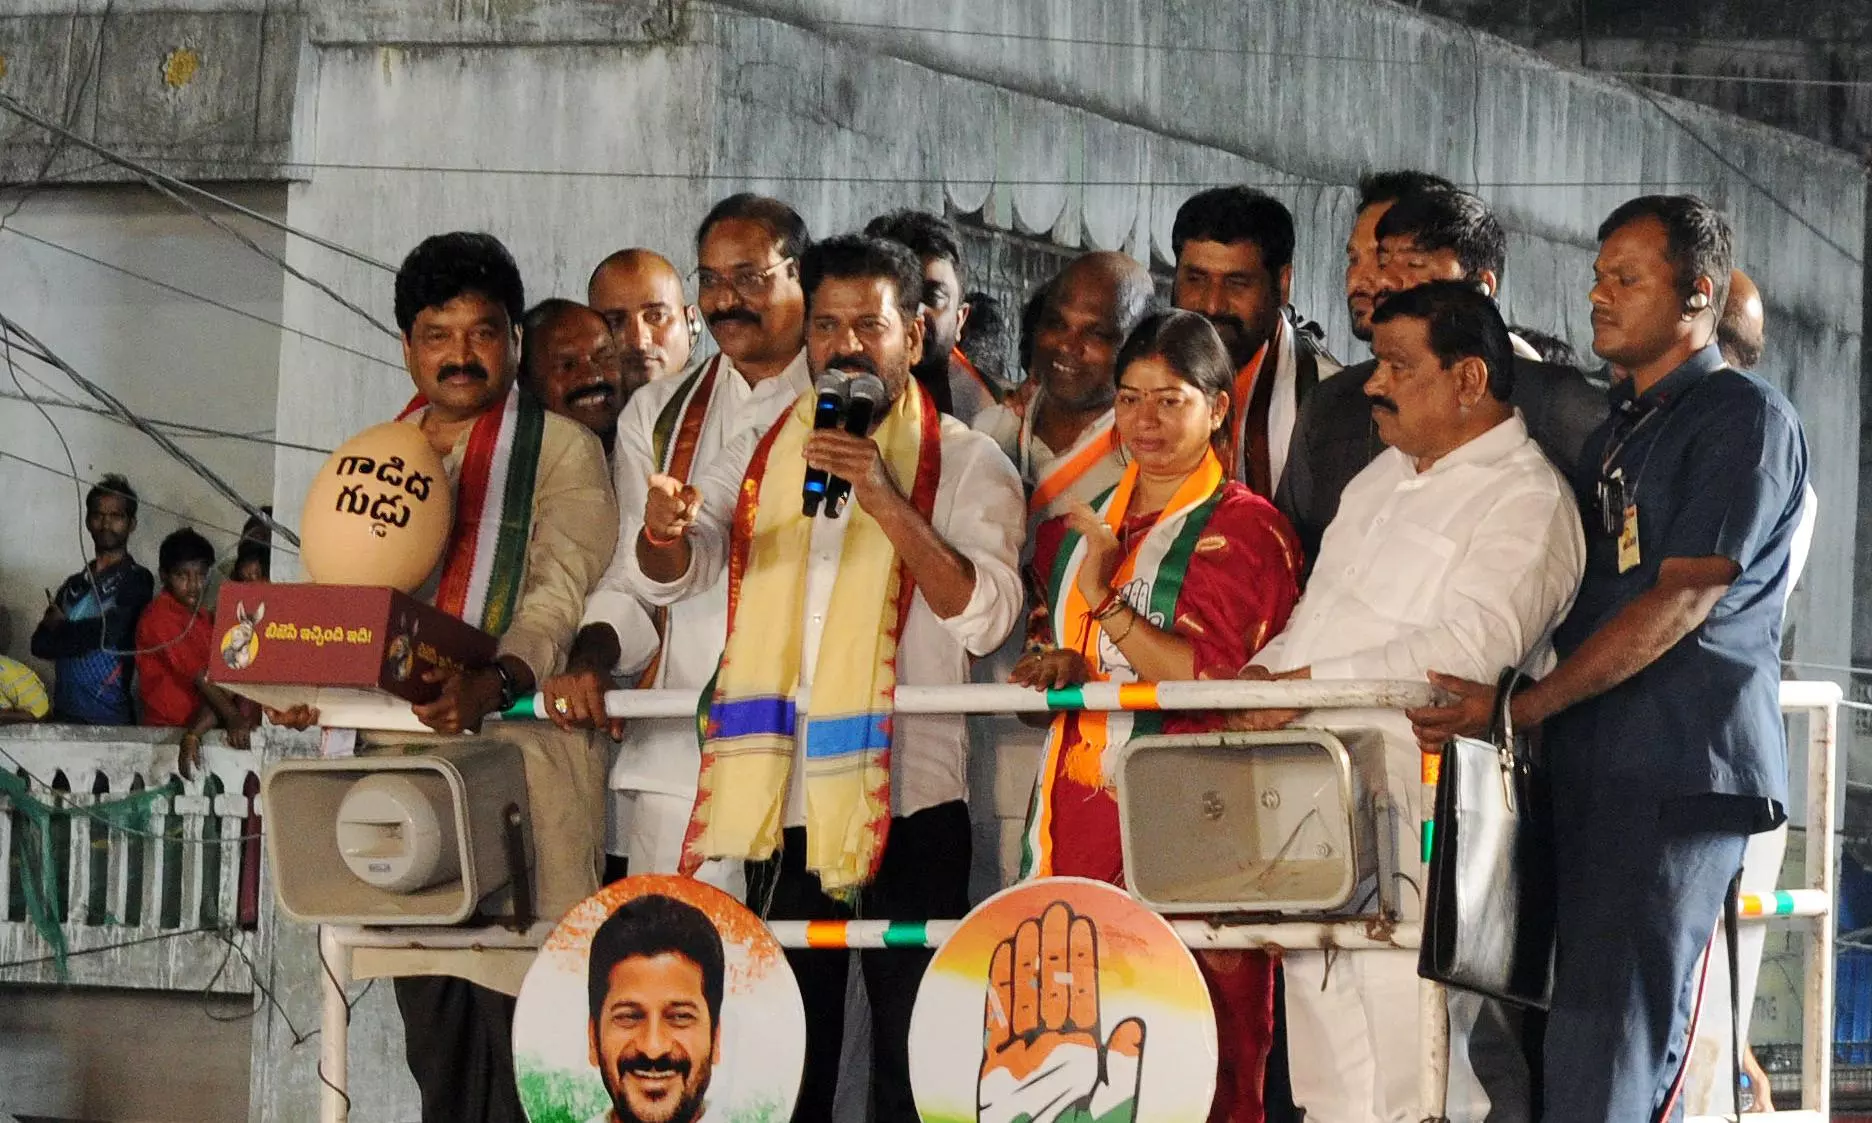 Revanth: Congress trounced KCR in semi-finals, will defeat Modi in finals on May 13